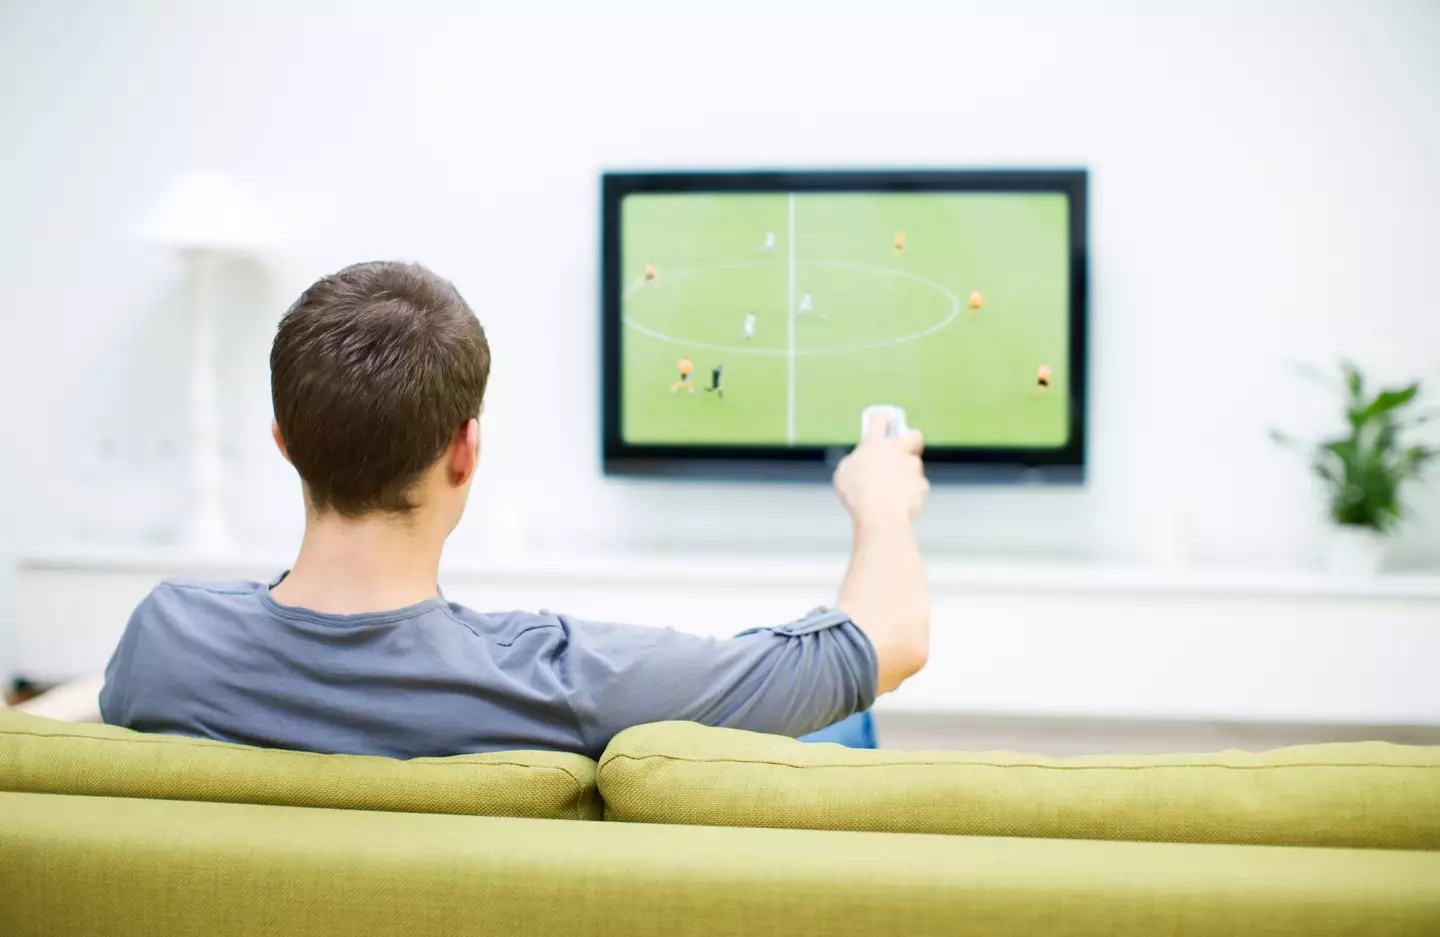 Using a modified Amazon Fire stick to watch sports could land you in serious trouble.